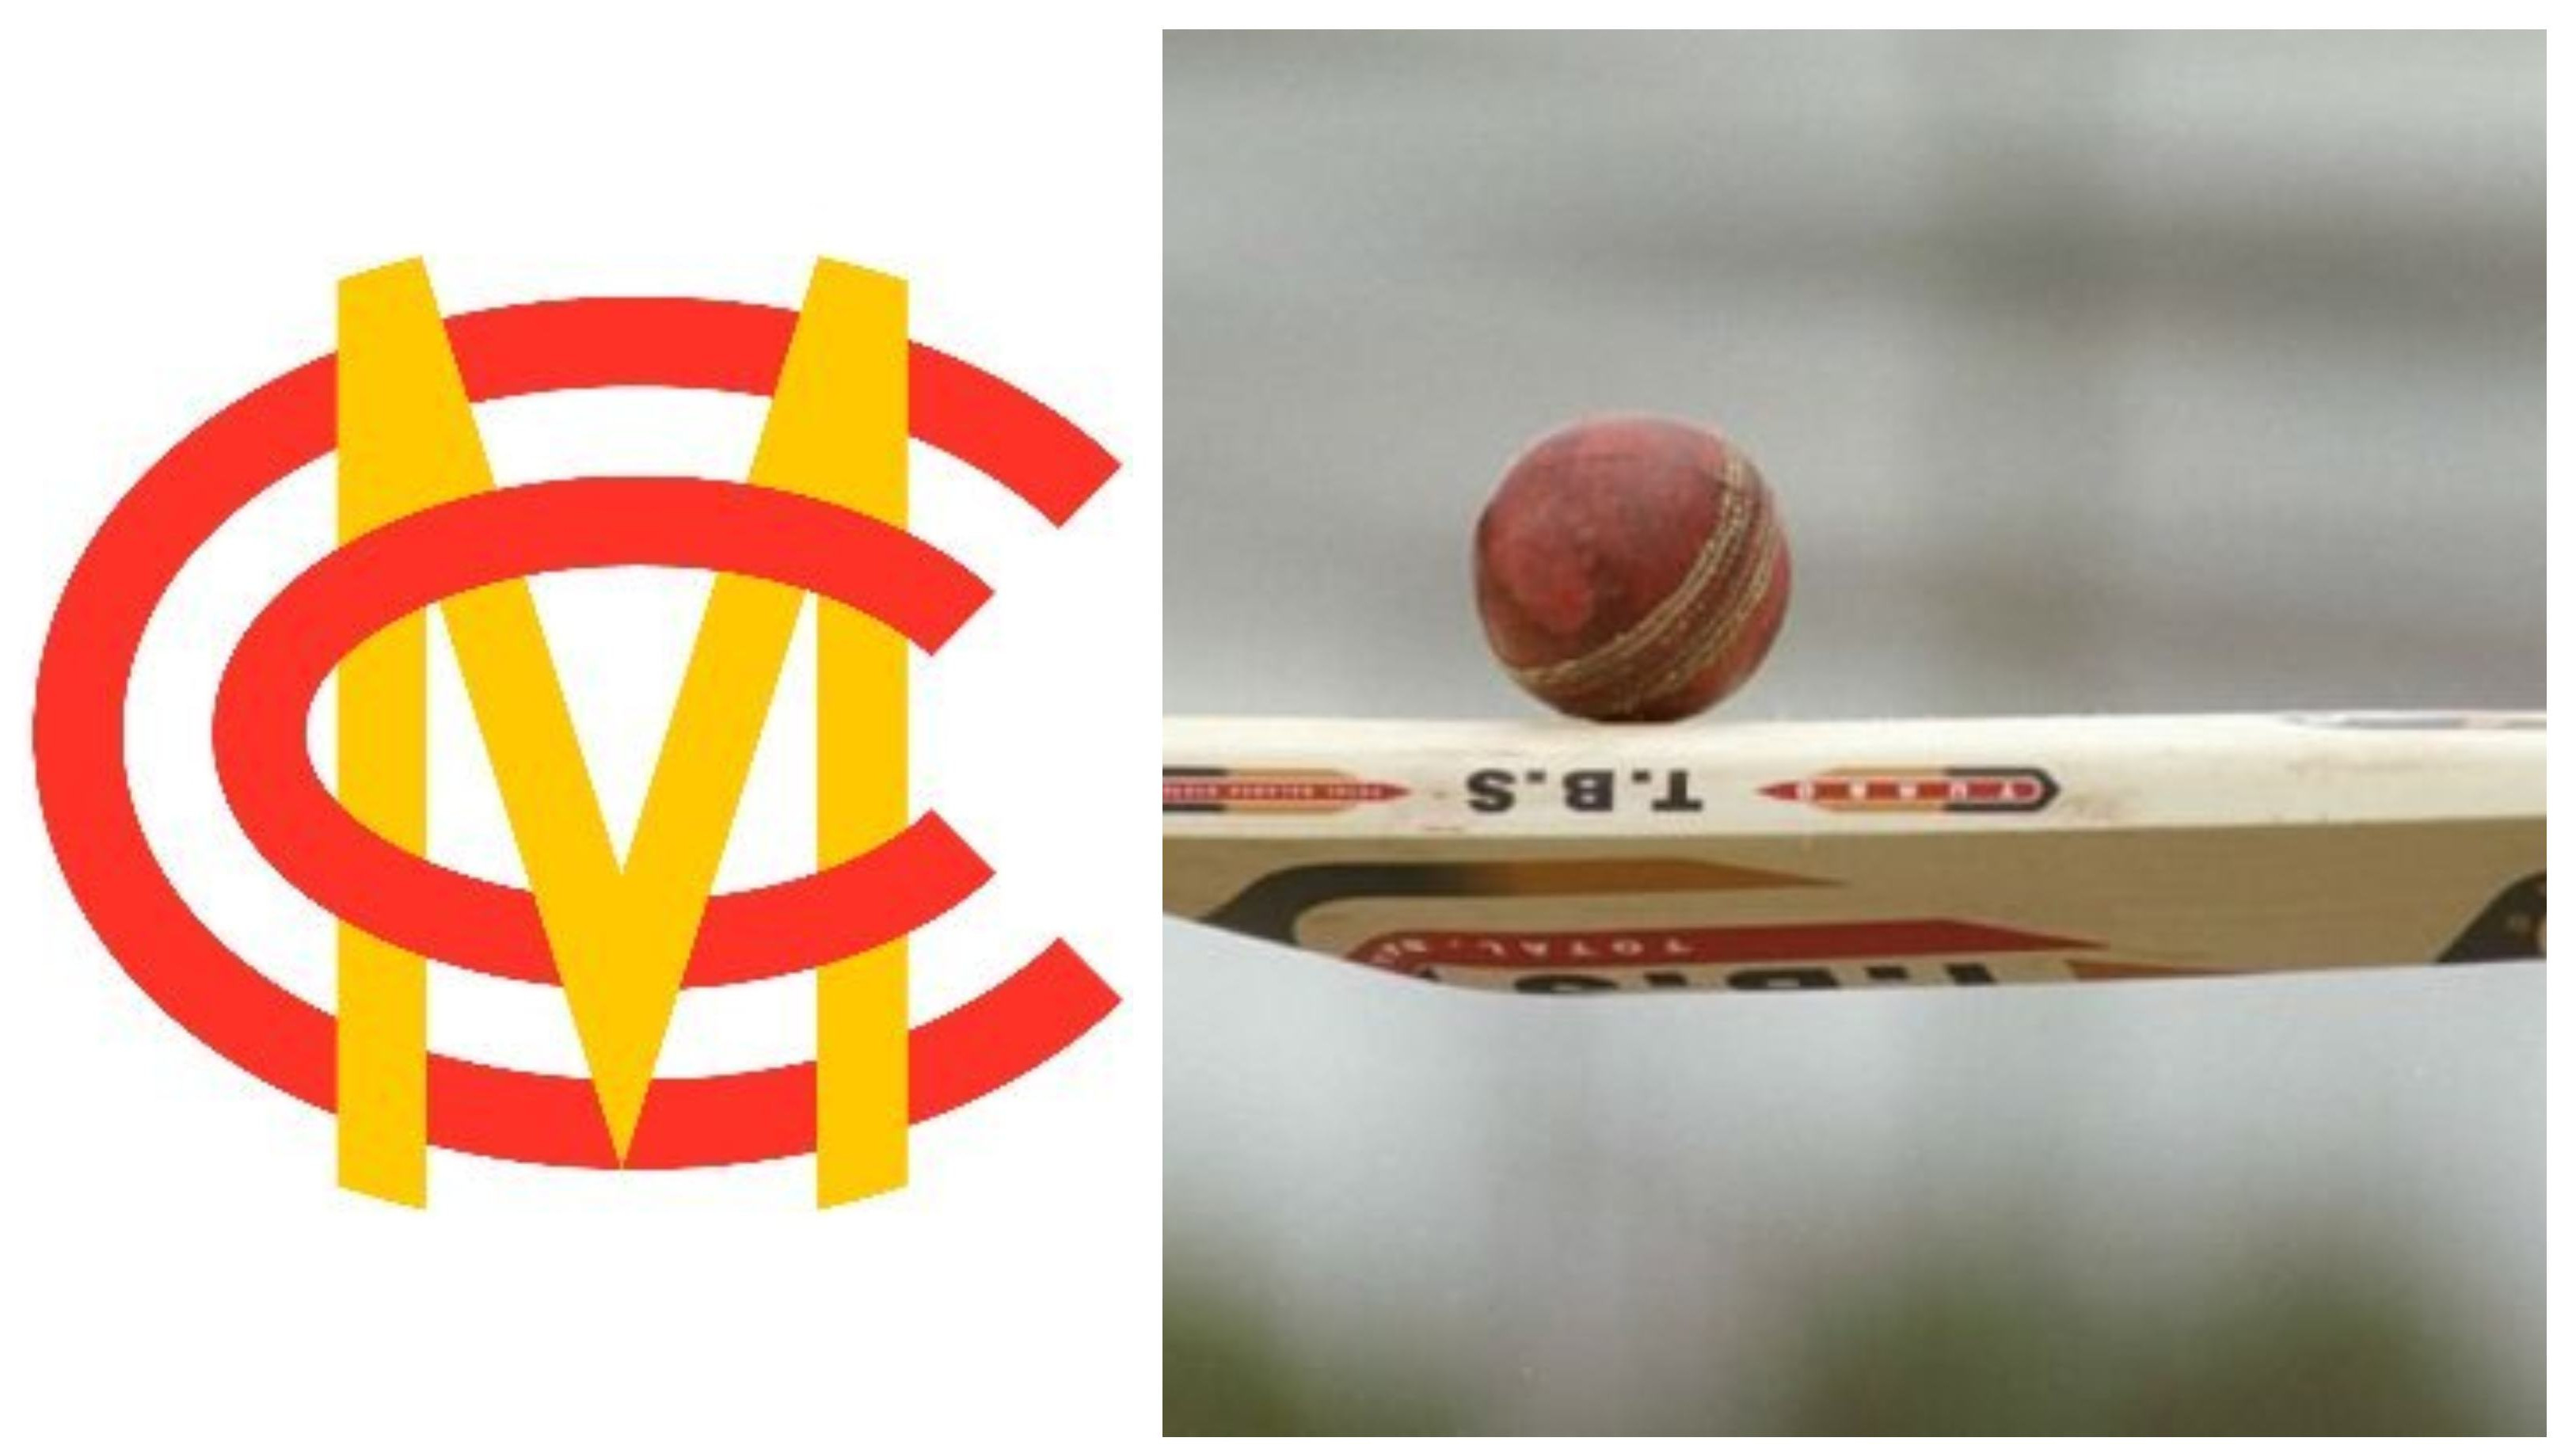 MCC rejects bamboo bats, says it will be illegal under current laws